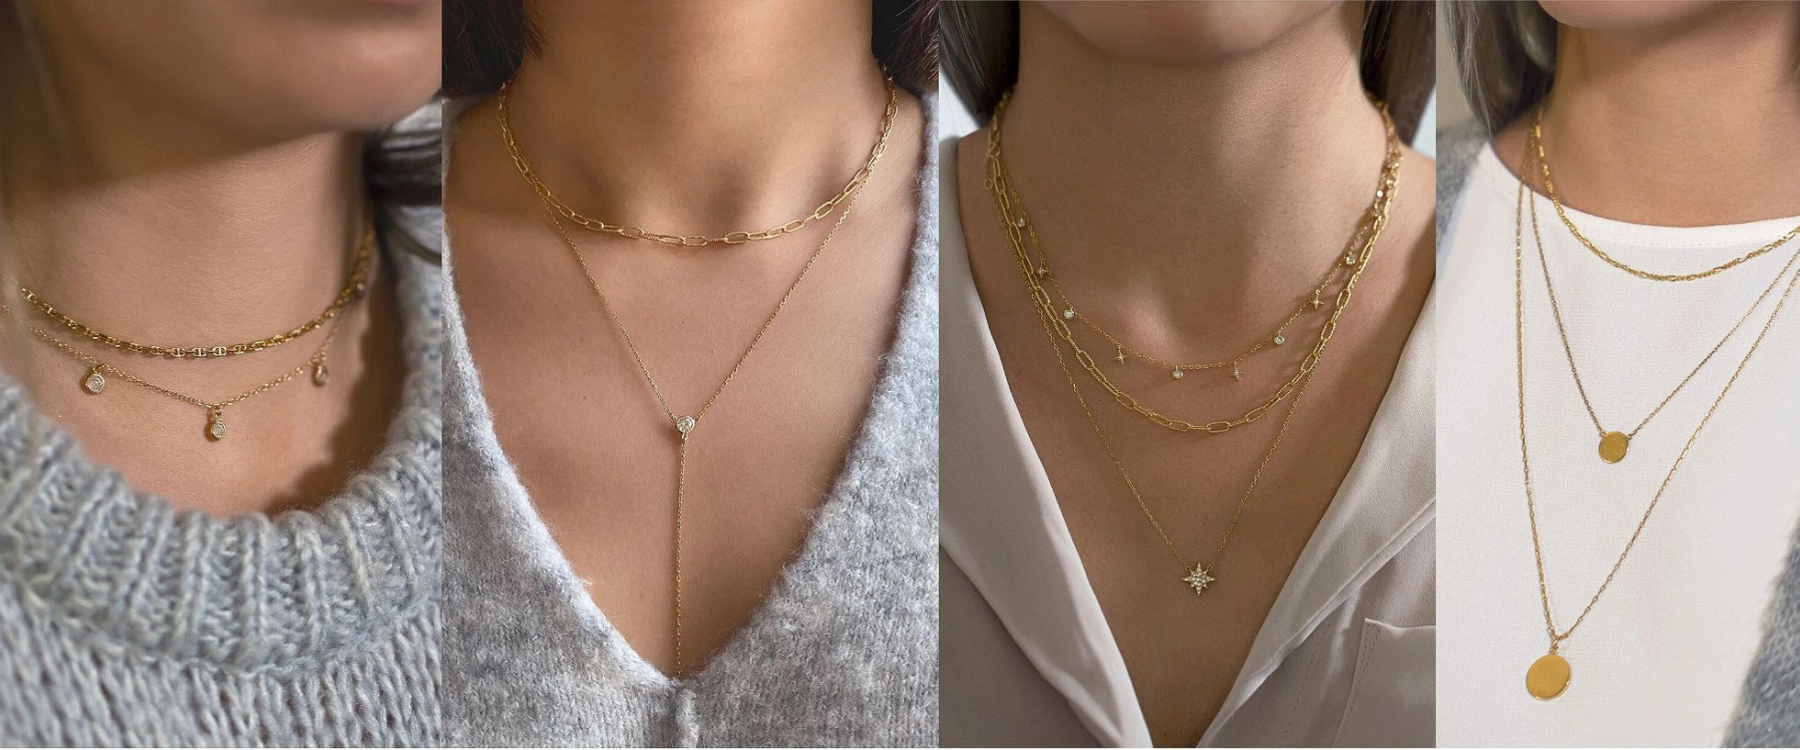 Learn the Art of Necklace Layering